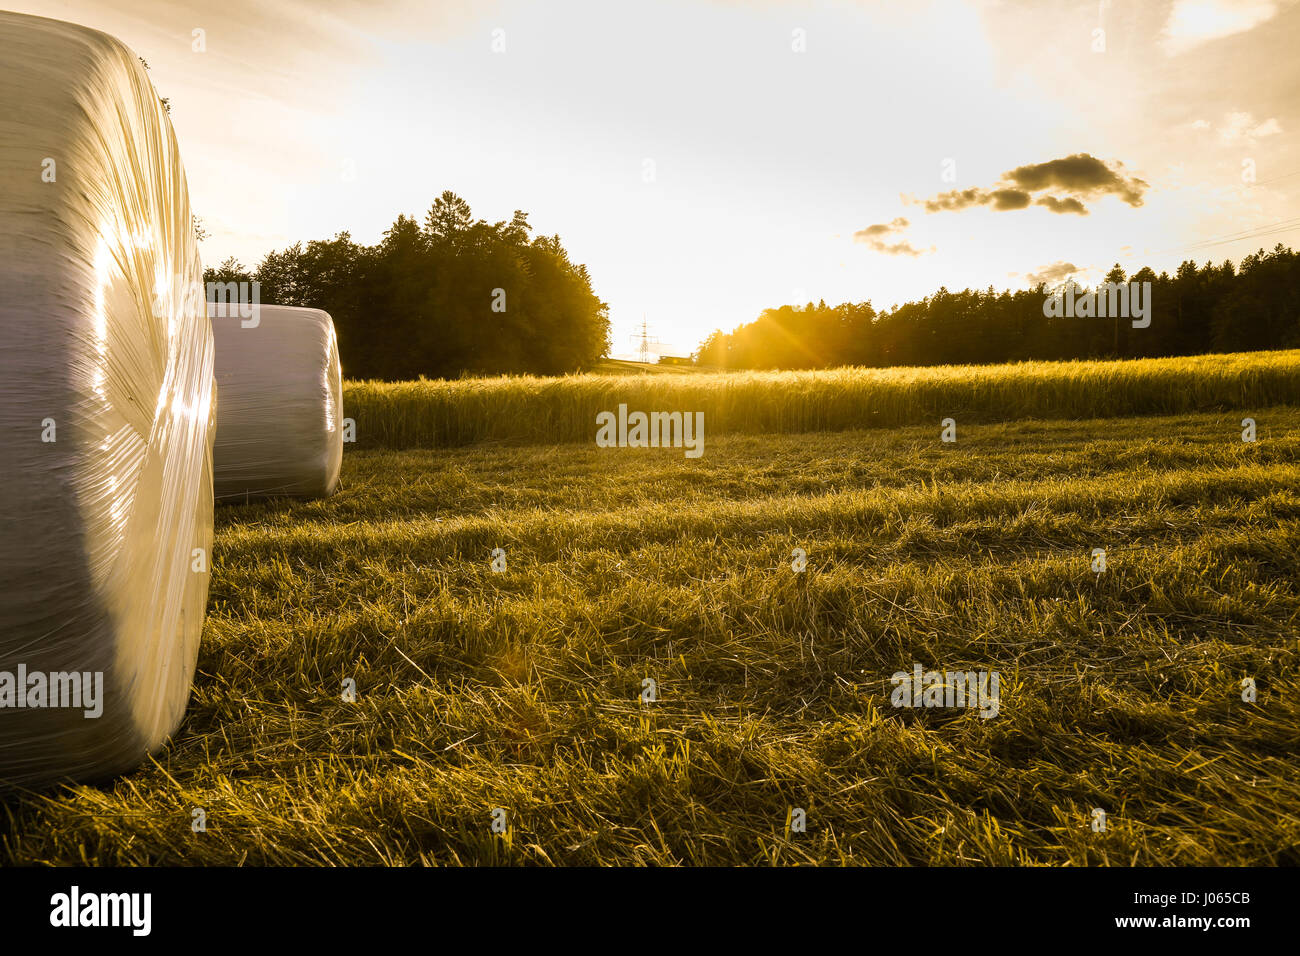 Barley field in golden glow of evening sun with silage rolls Stock Photo